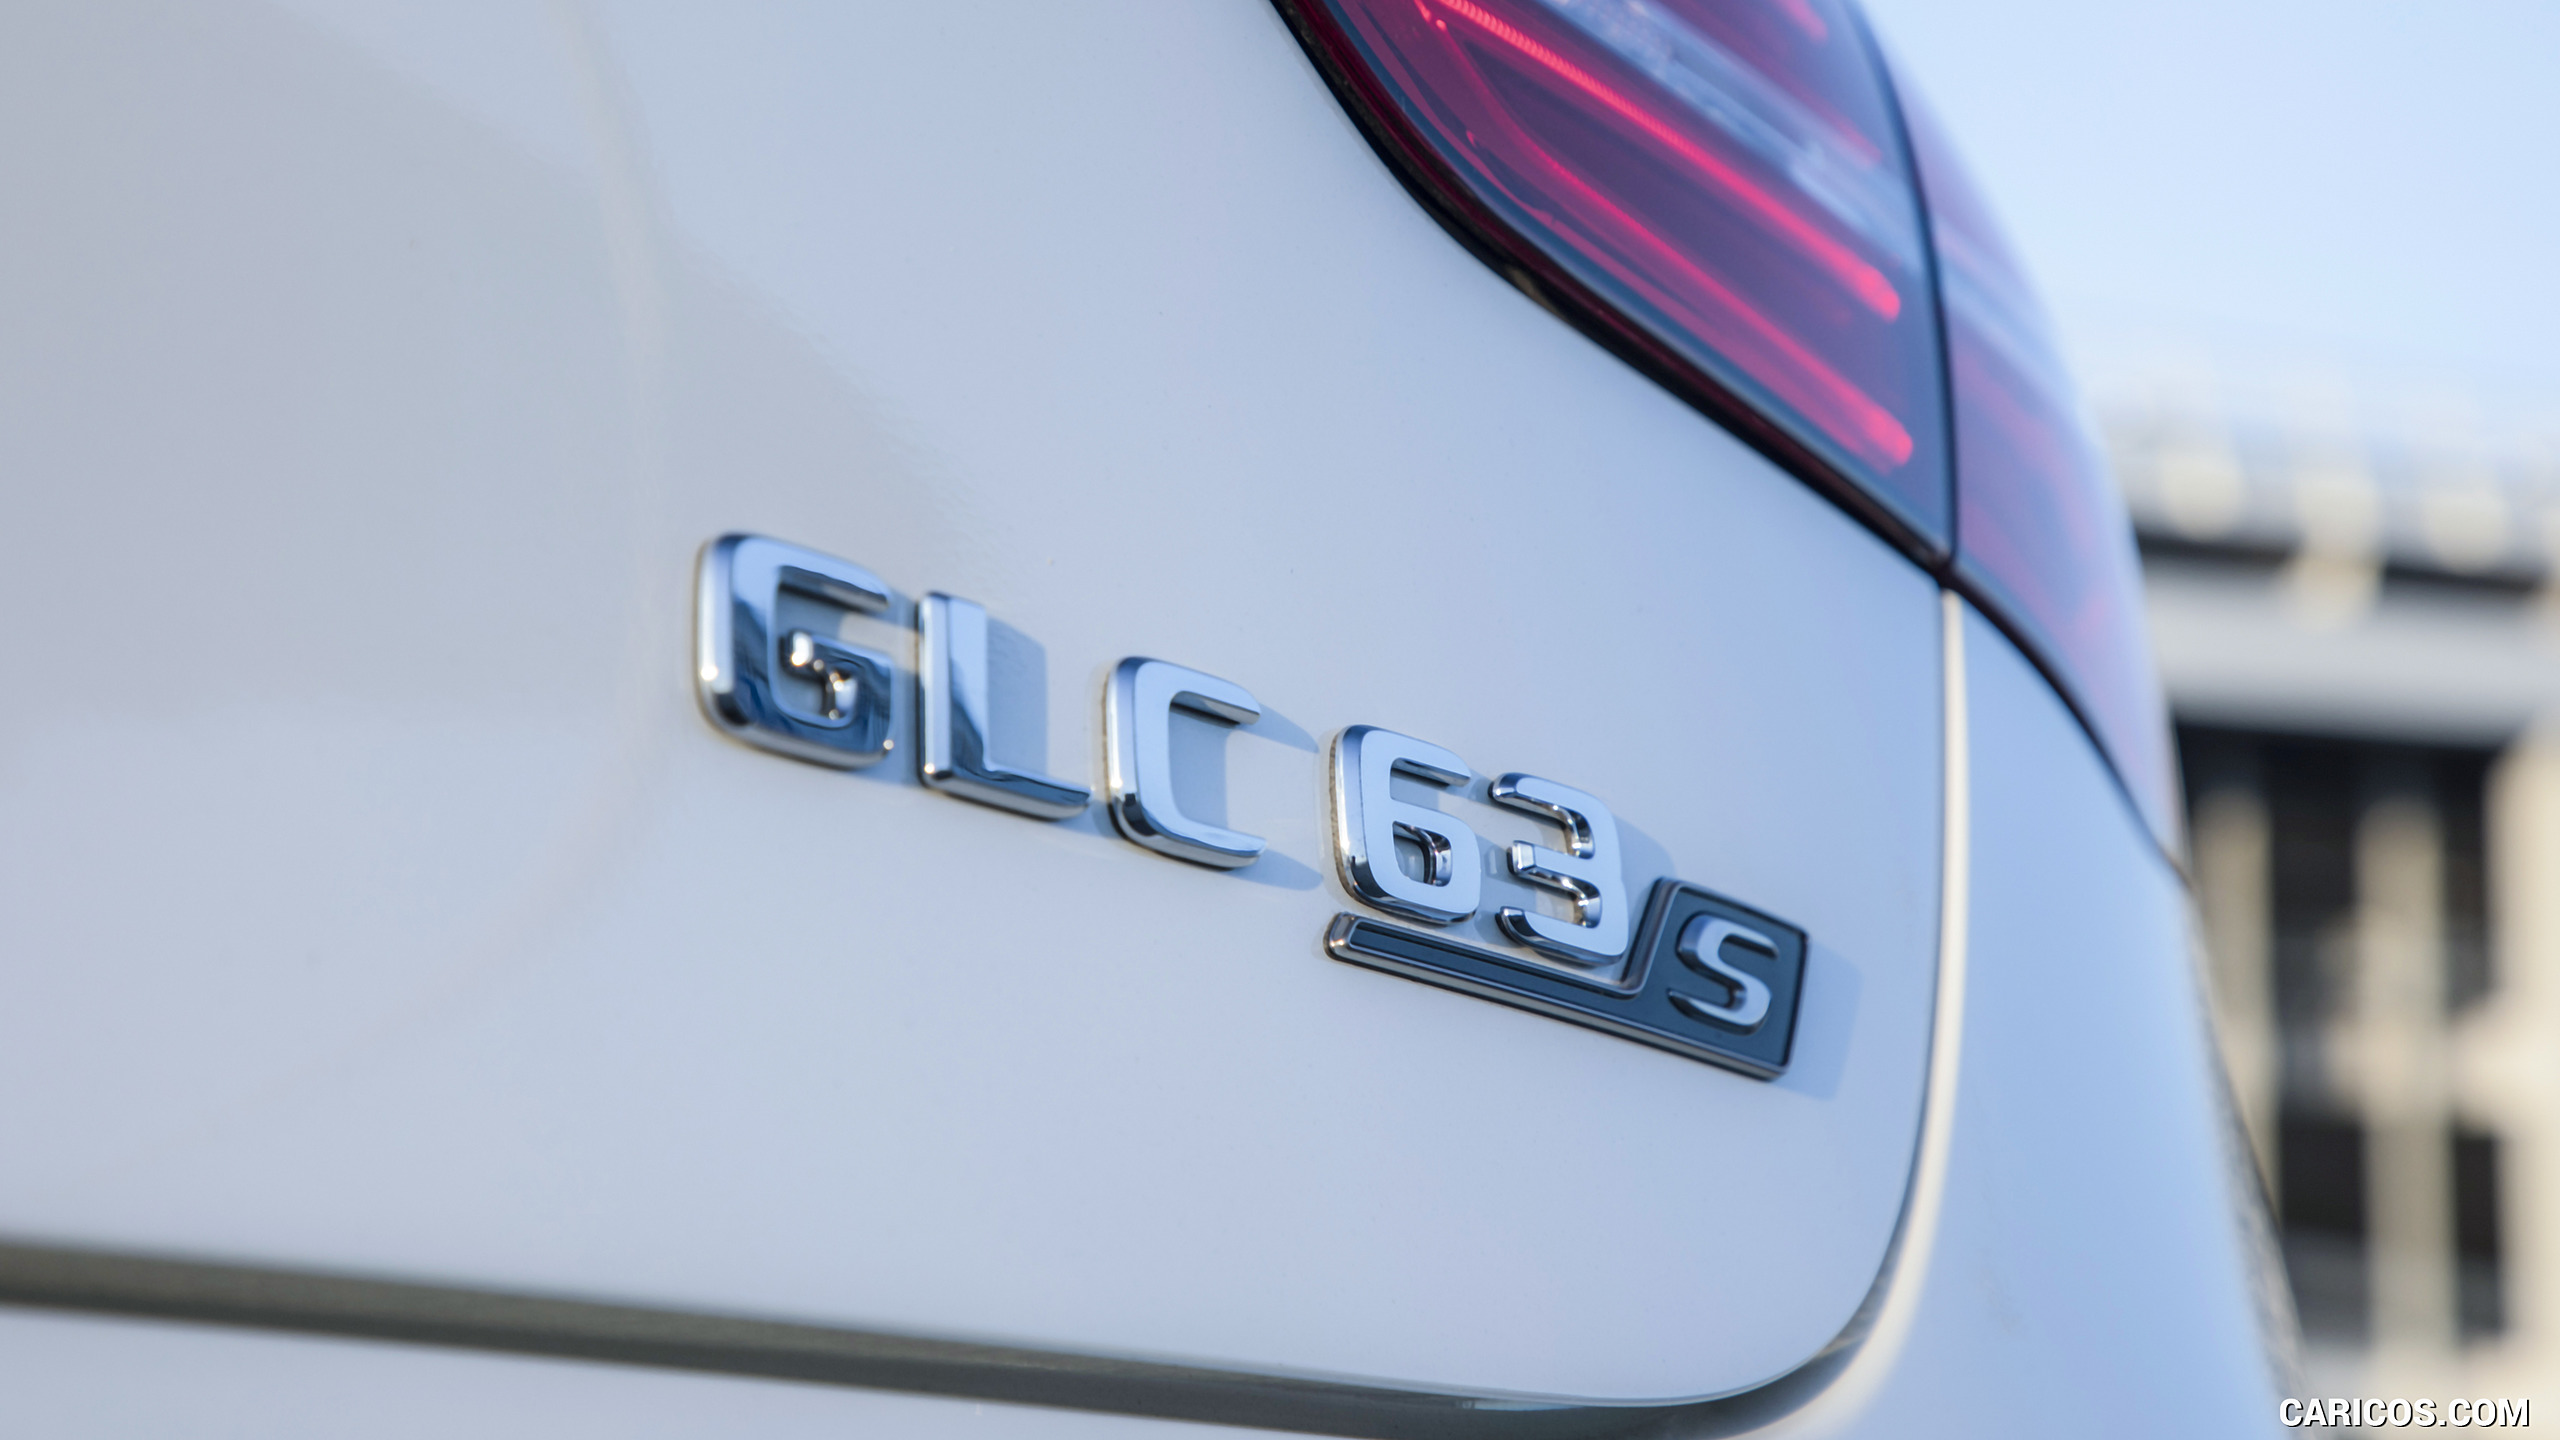 2018 Mercedes-AMG GLC 63 S Coupe - Badge, #62 of 75